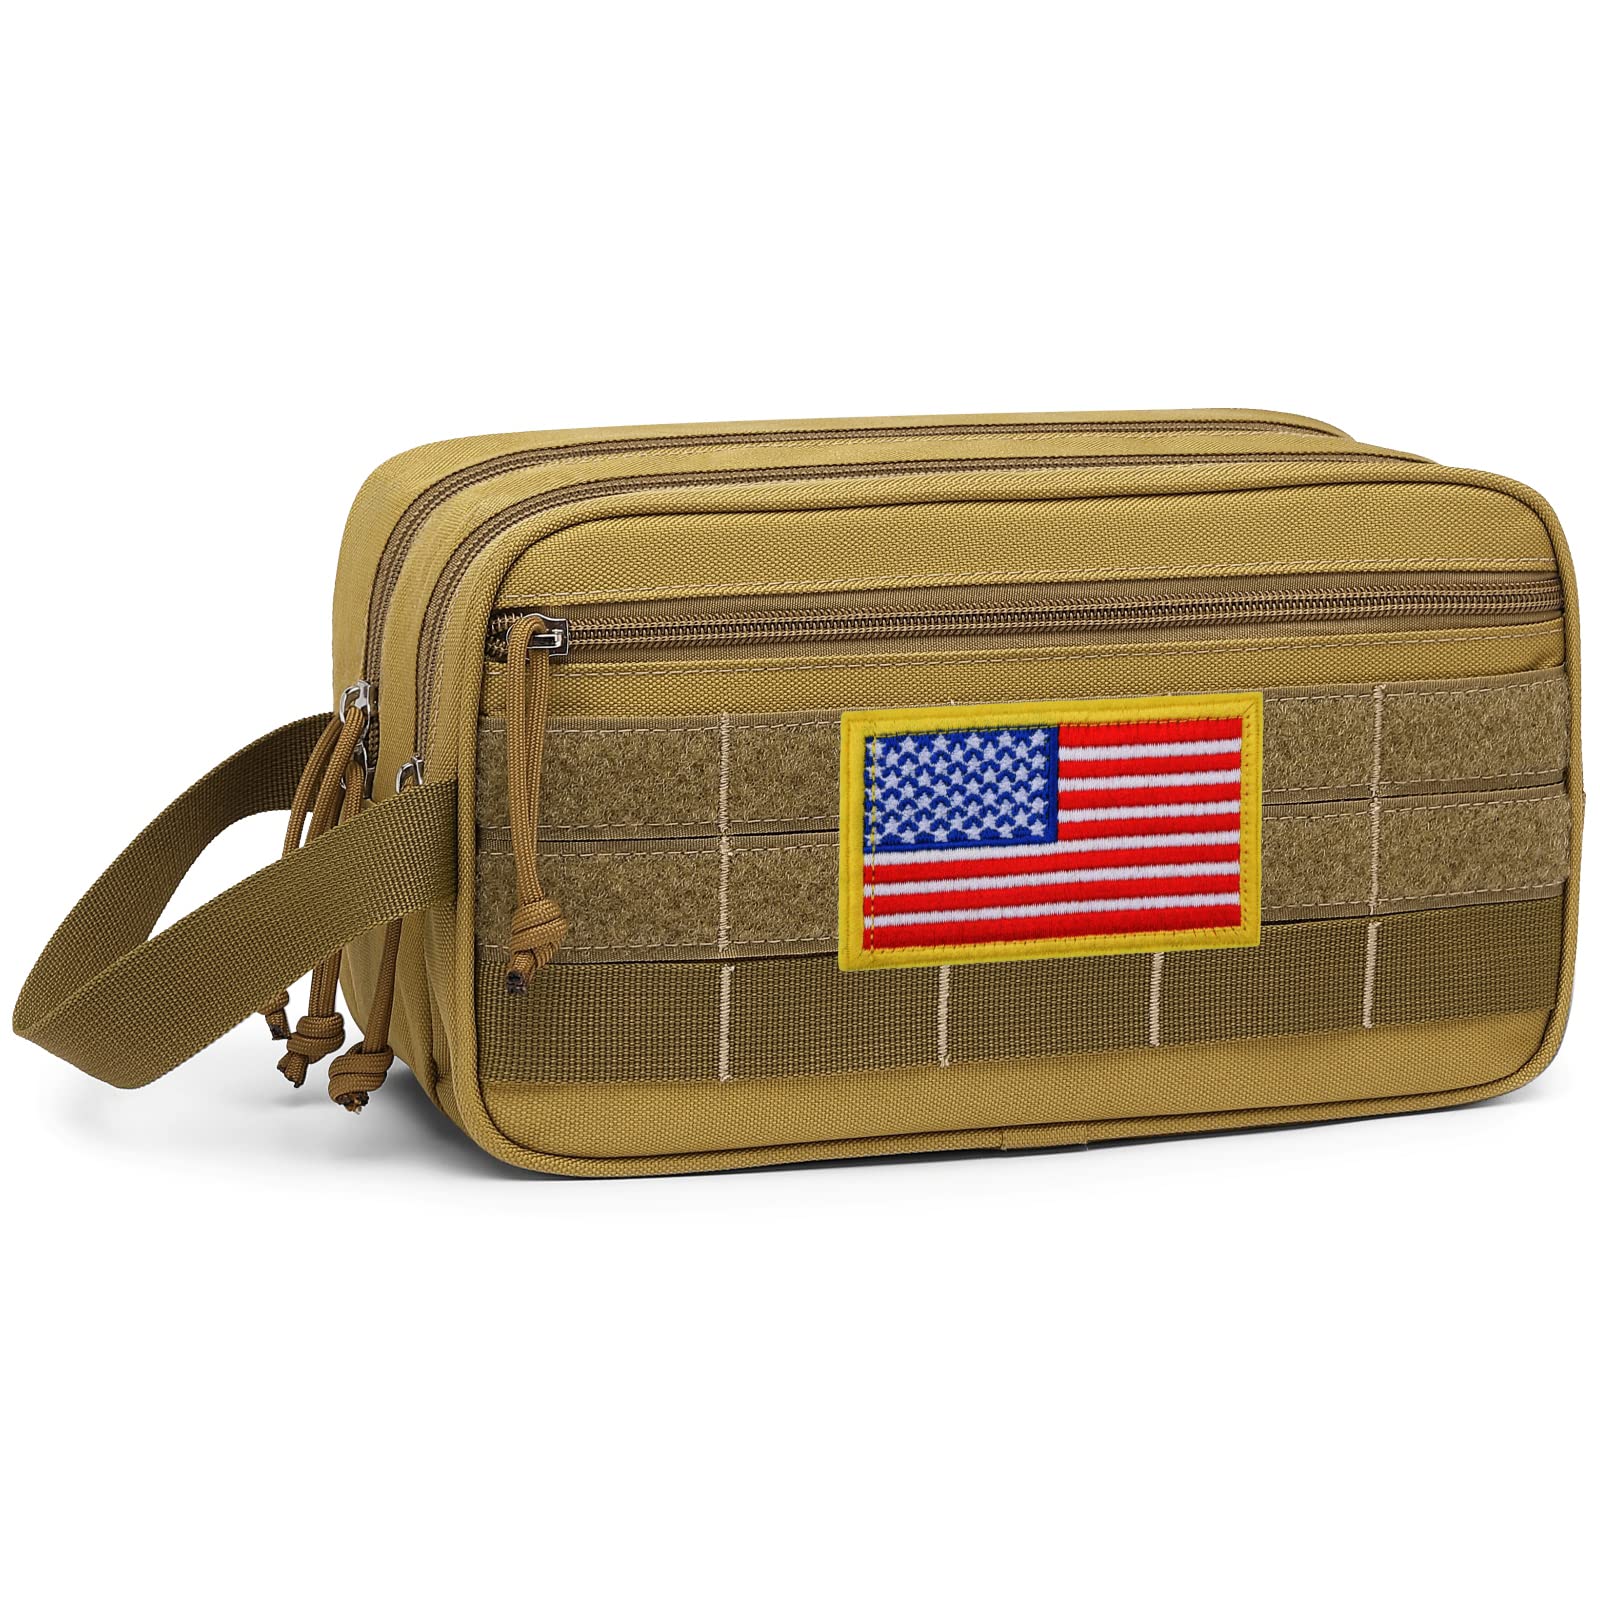 TACTICISM Toiletry Bag for Men - Dry Wet Separate Travel Toiletry Bag, Tactical Molle Dopp Kit for Men with Large Capacity, Water-Resistant Shaving Bag for Adult Women for Travel, Brown